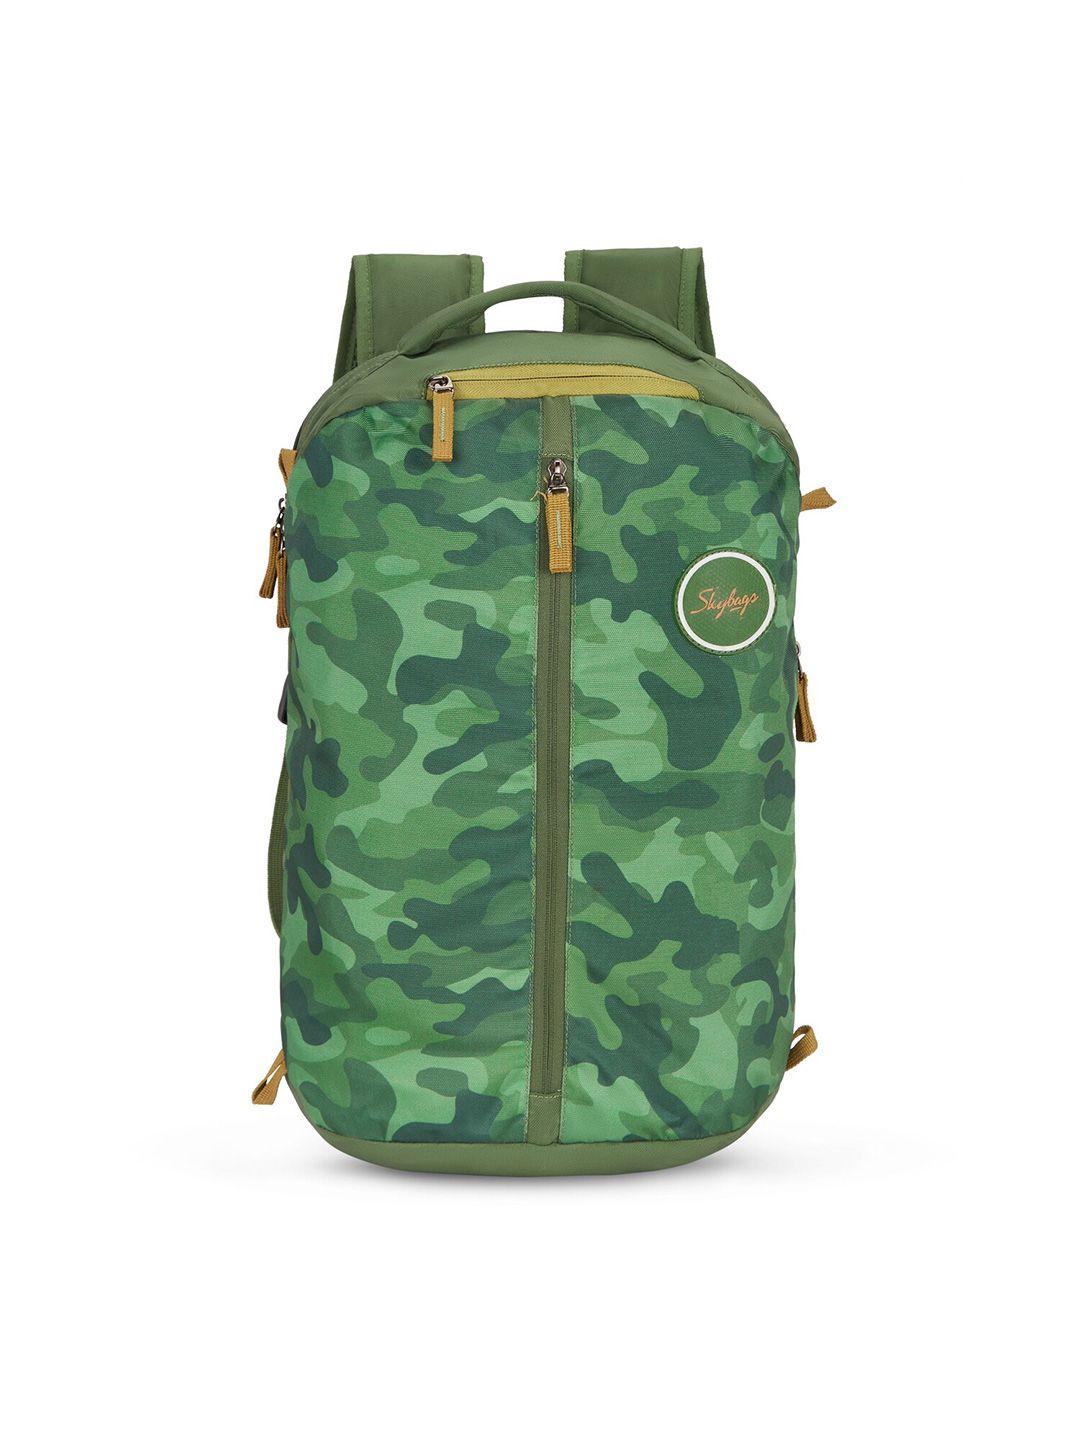 skybags-unisex-camouflage-printed-padded-backpack